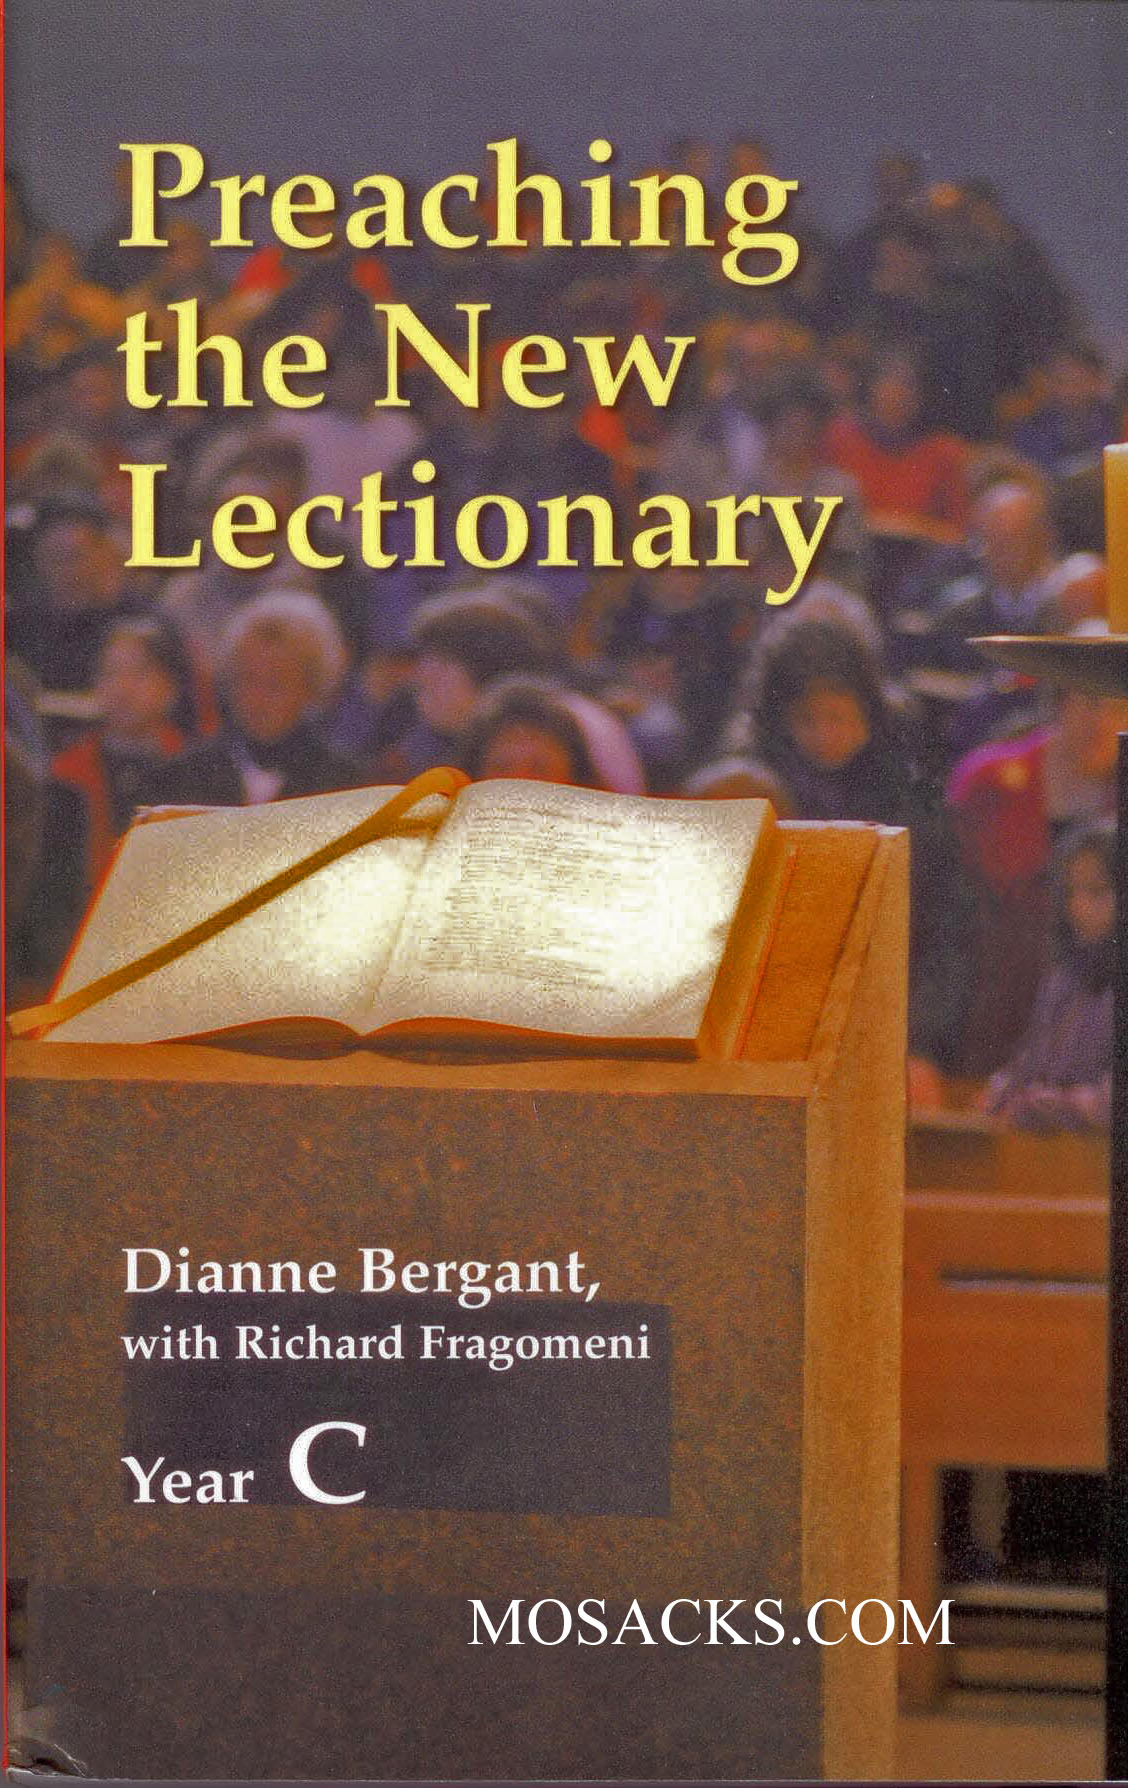 Preaching The New Lectionary Year C by Dianne Bergant